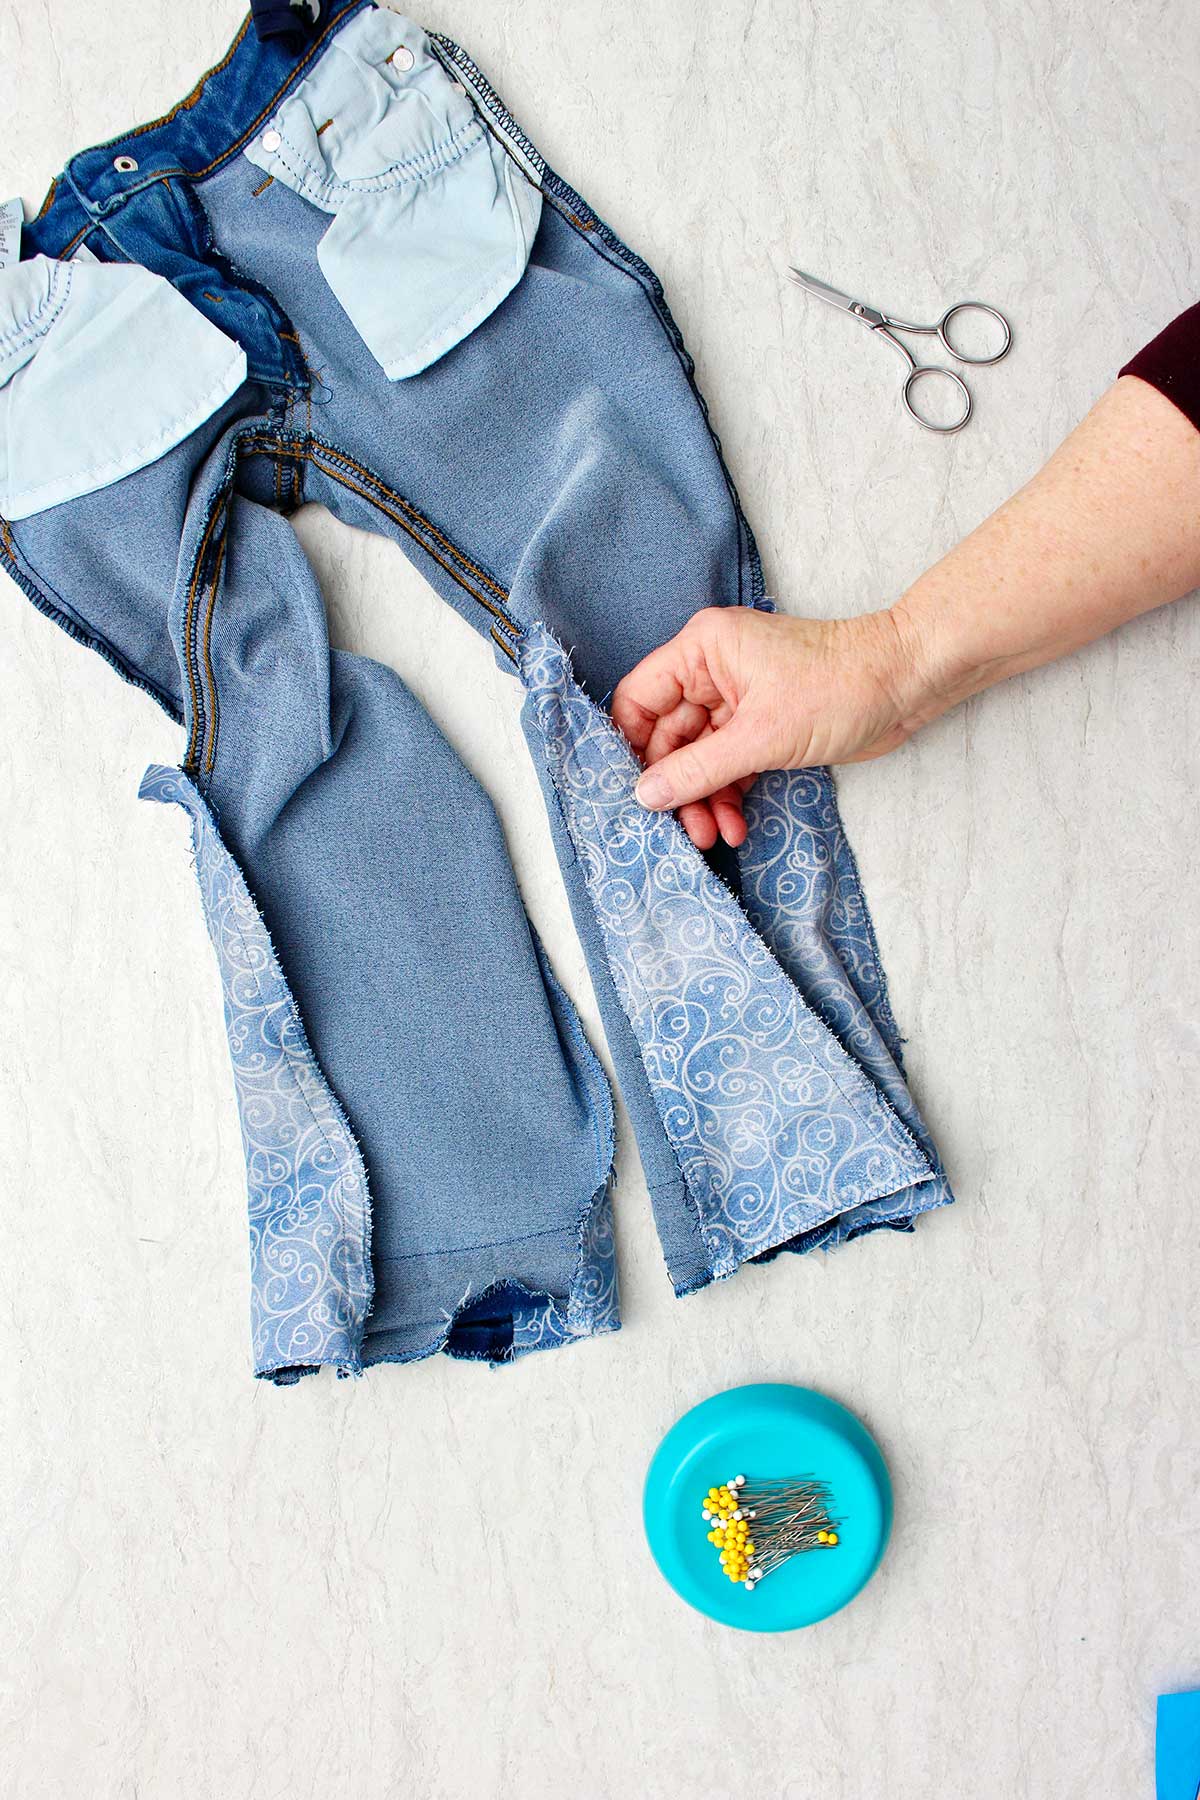 Hand showing inside out jeans with sewn in piece of fabric to make bell bottoms.